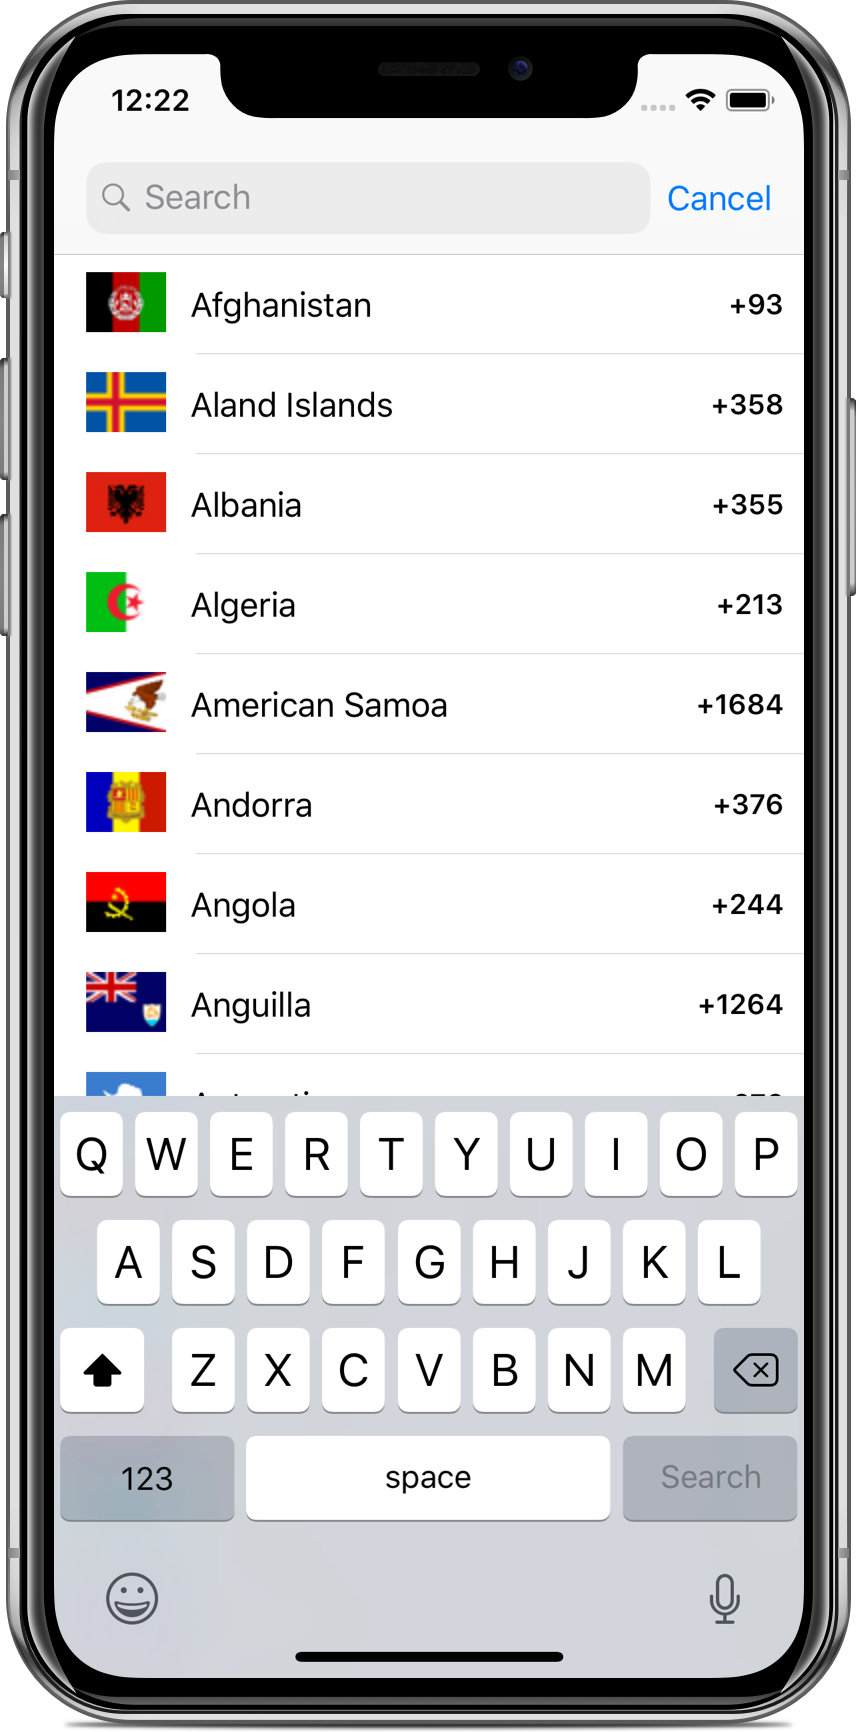 A screenshot of a county code picker that appears when the country code field is selected.